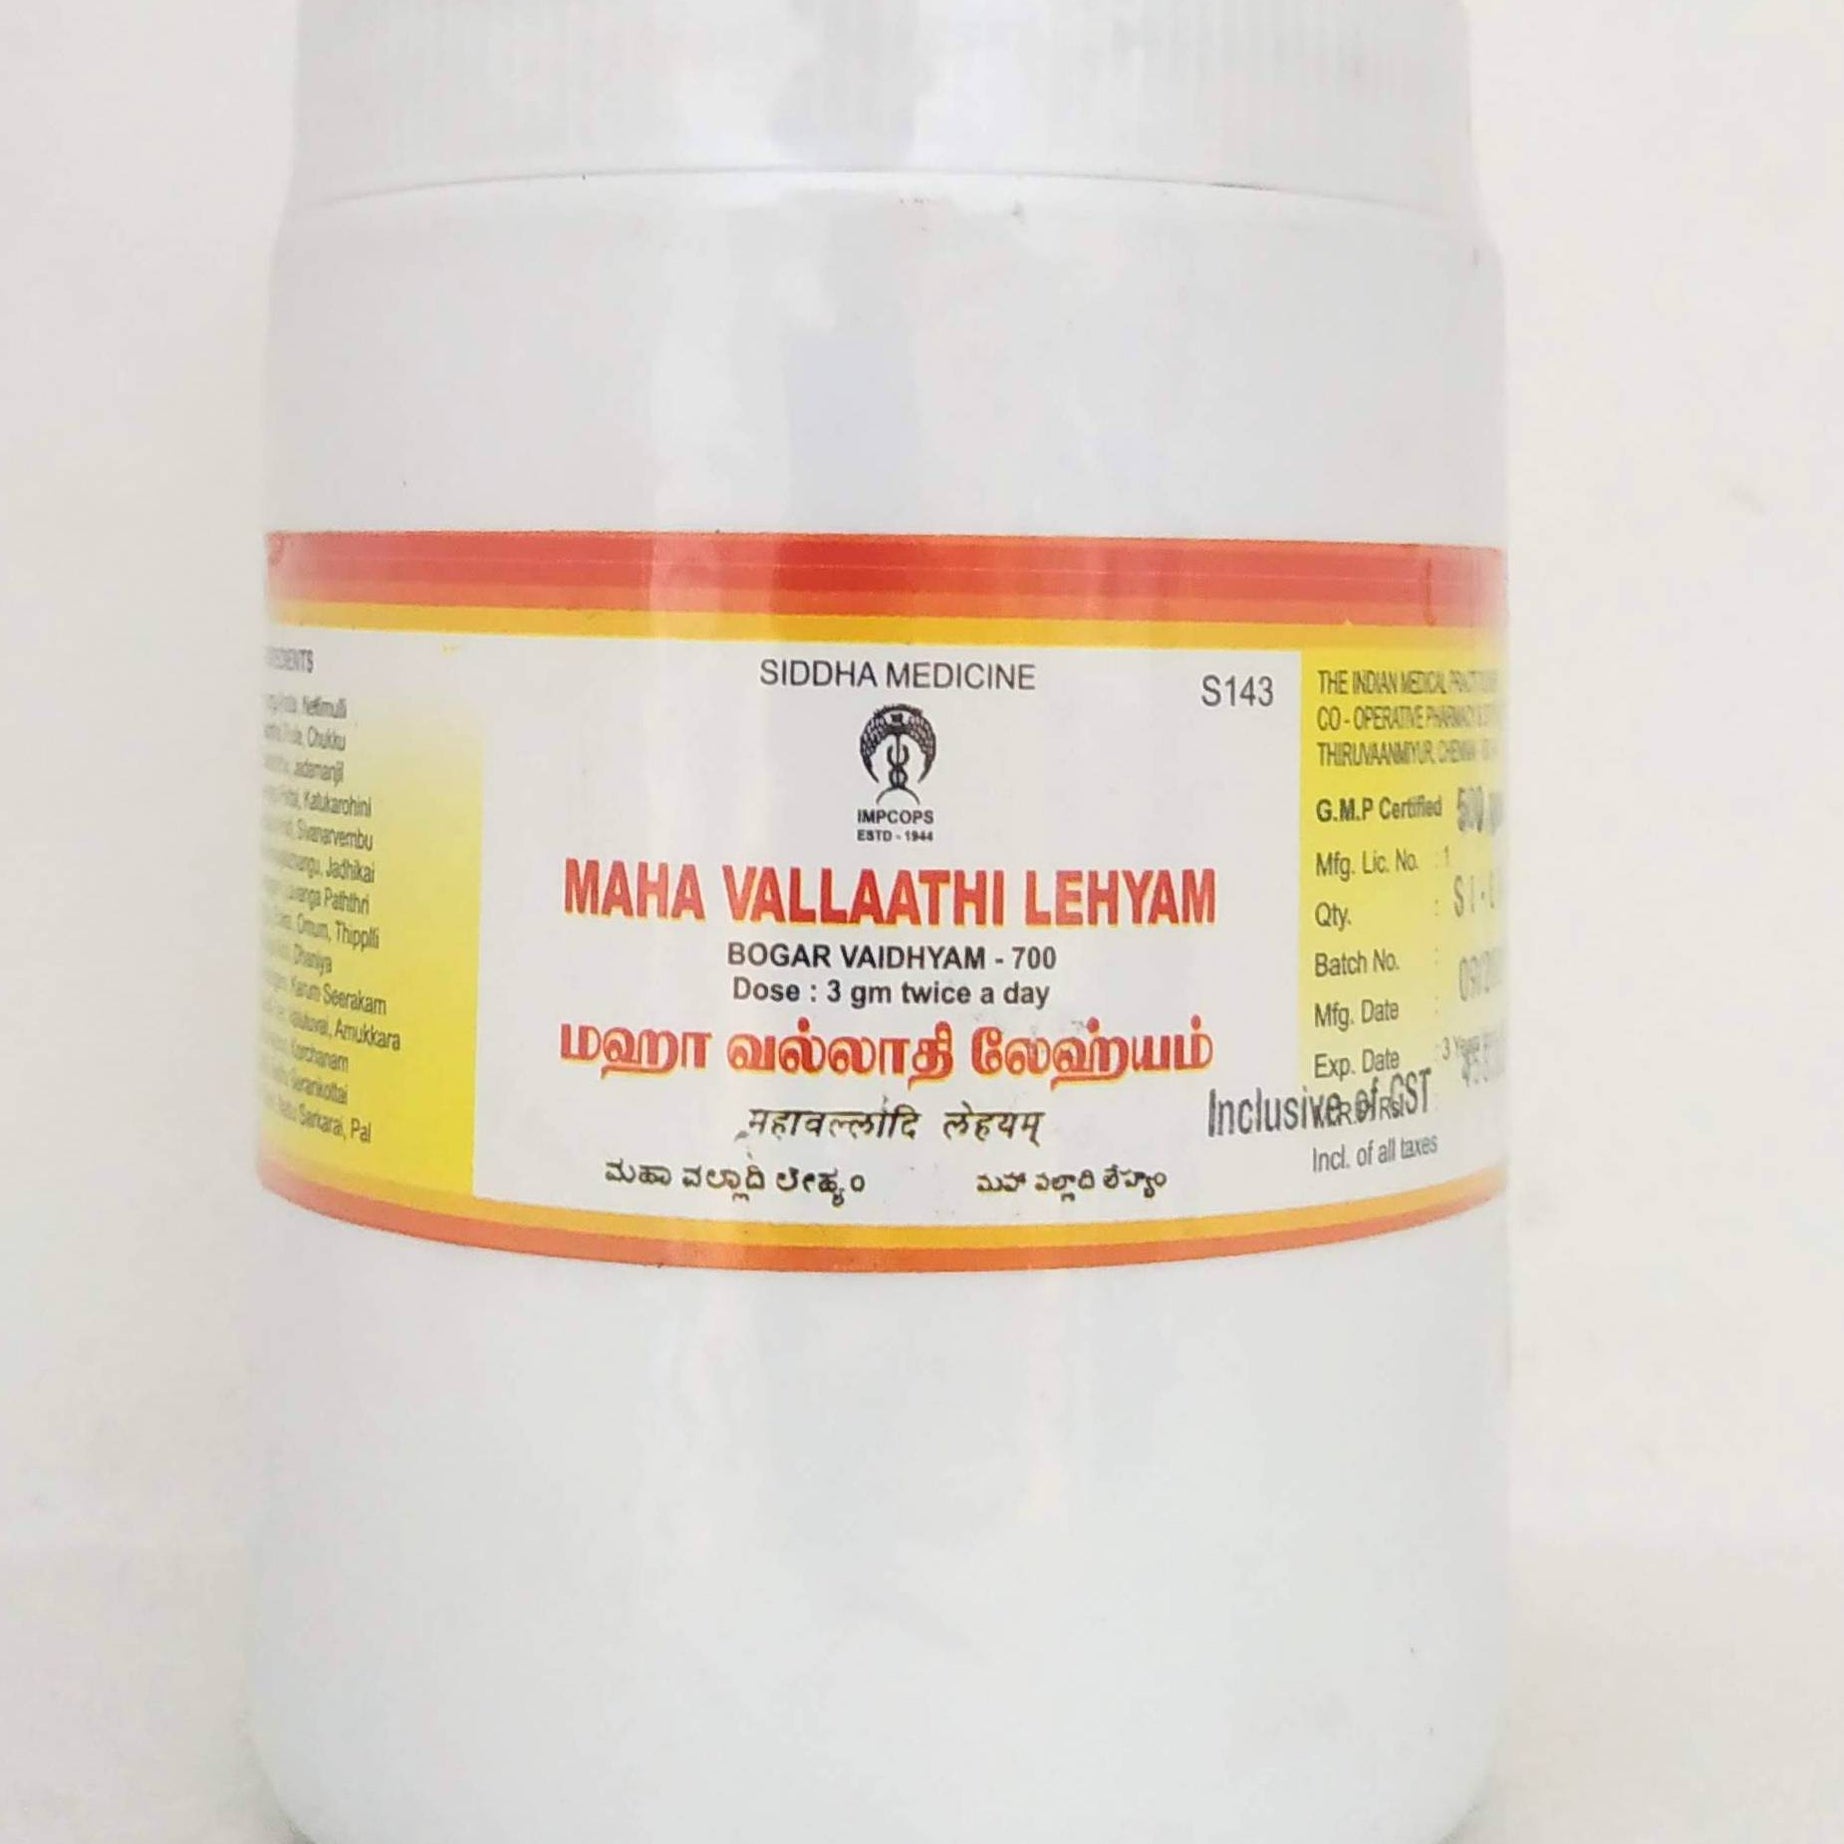 Shop Mahavallathi Lehyam 500gm at price 458.00 from Impcops Online - Ayush Care